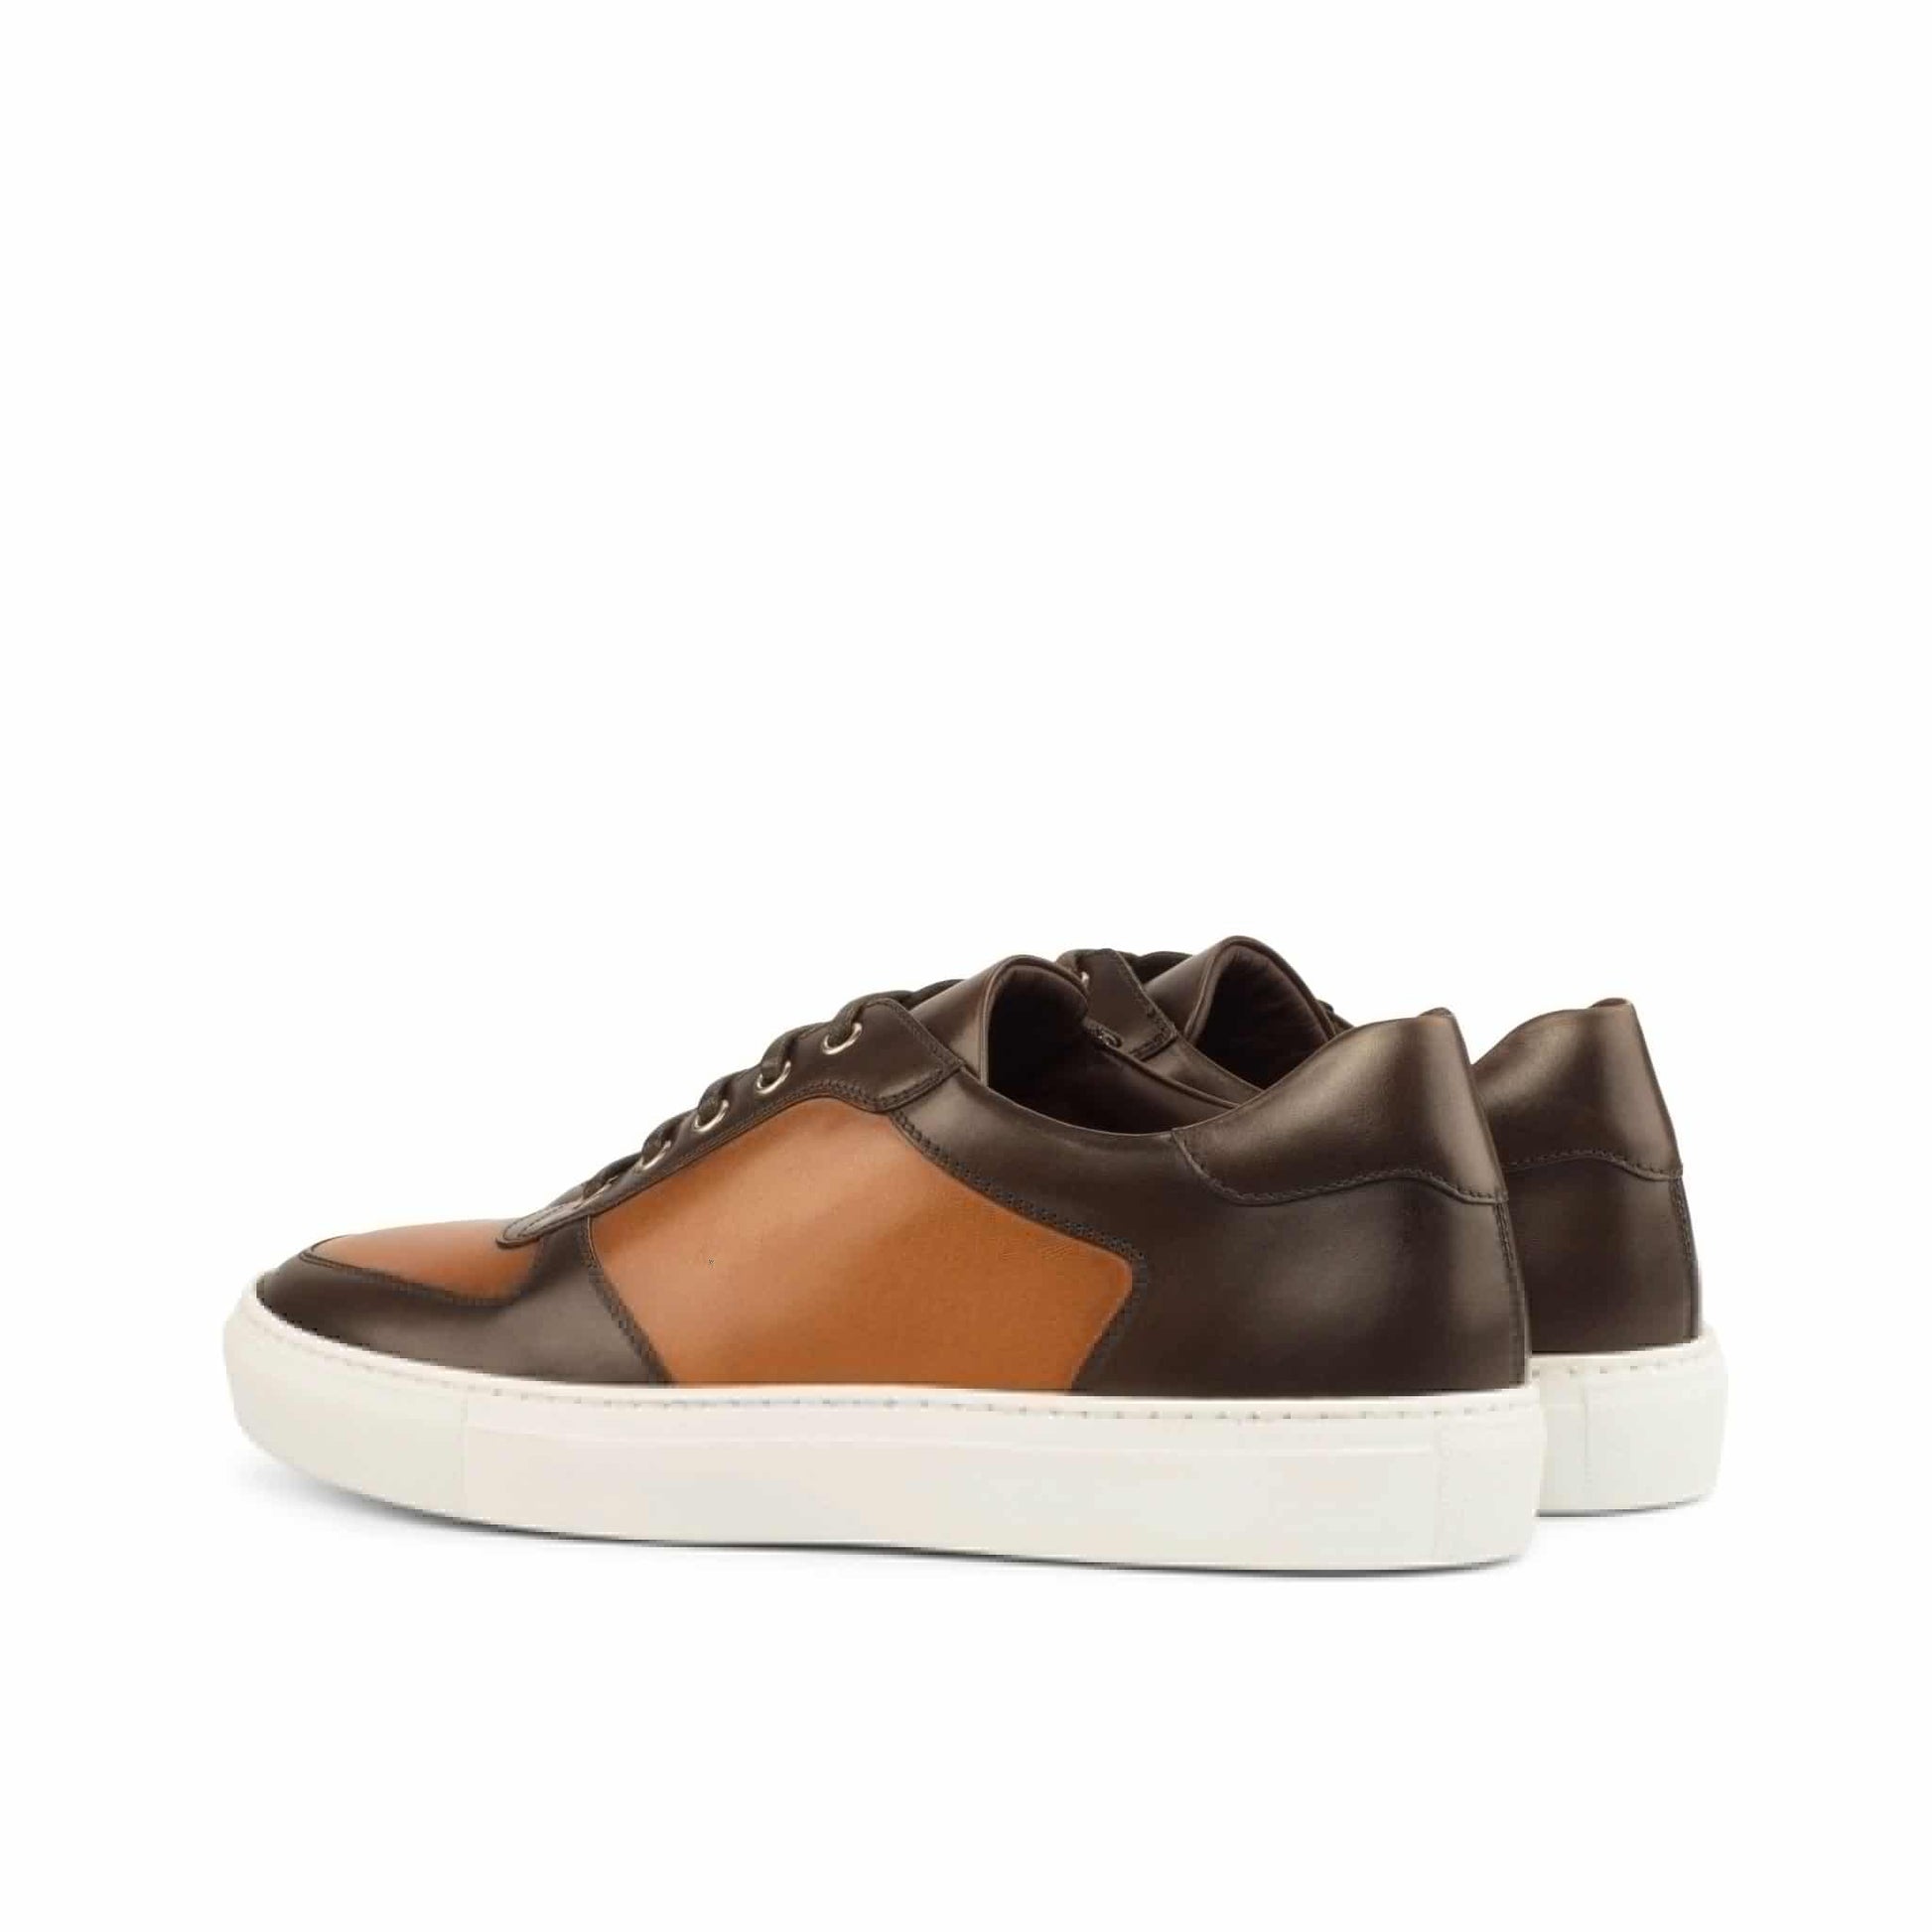 Tan and Brown Leather Low Top Lace Up Sneaker for Men. White Comfortable Cup Sole.